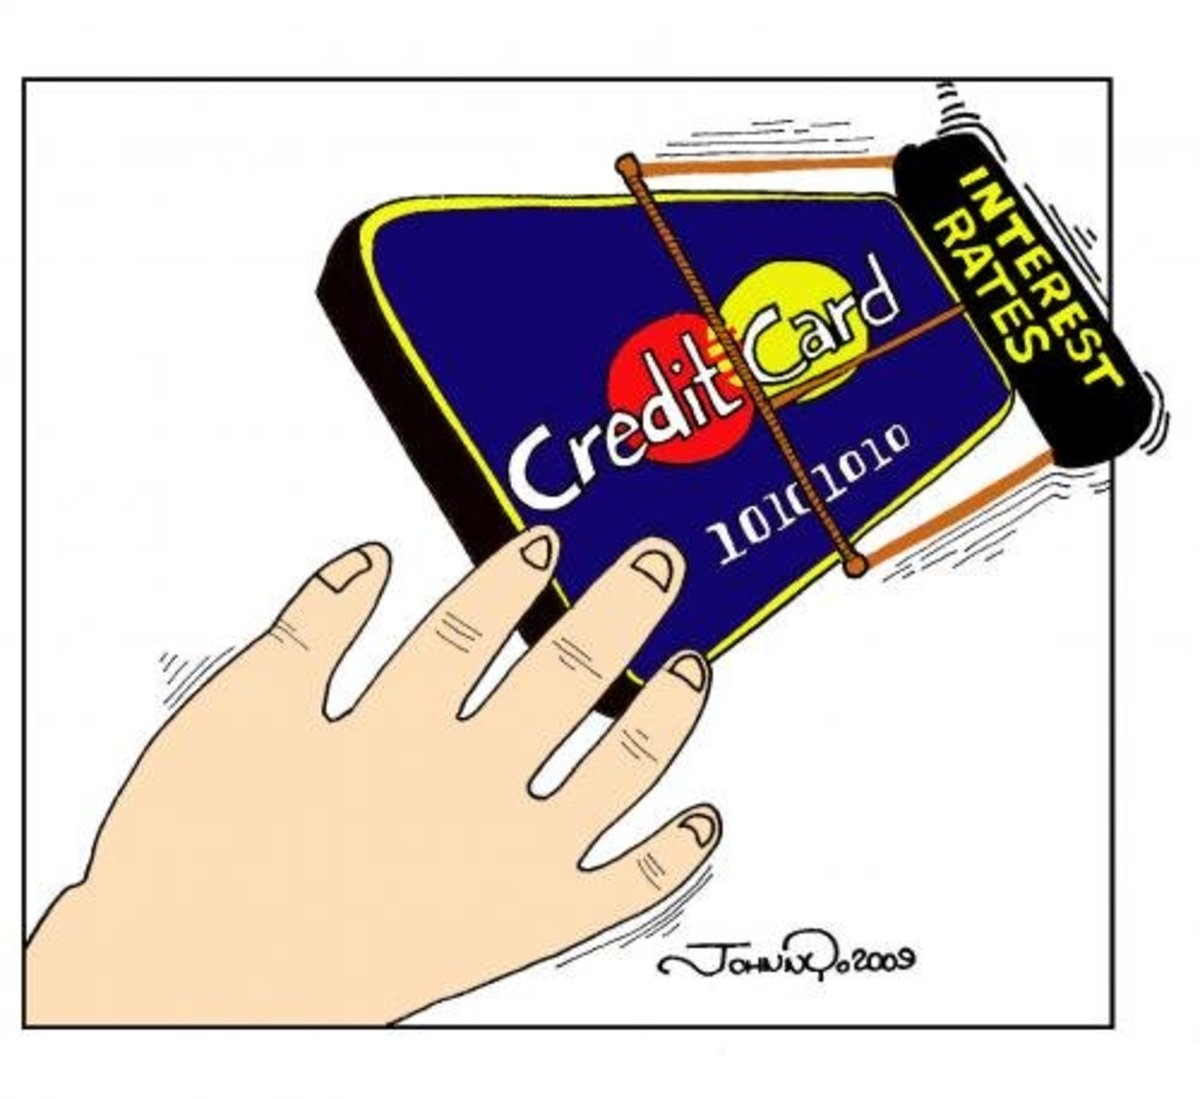 Credit cards can be dangerous traps.